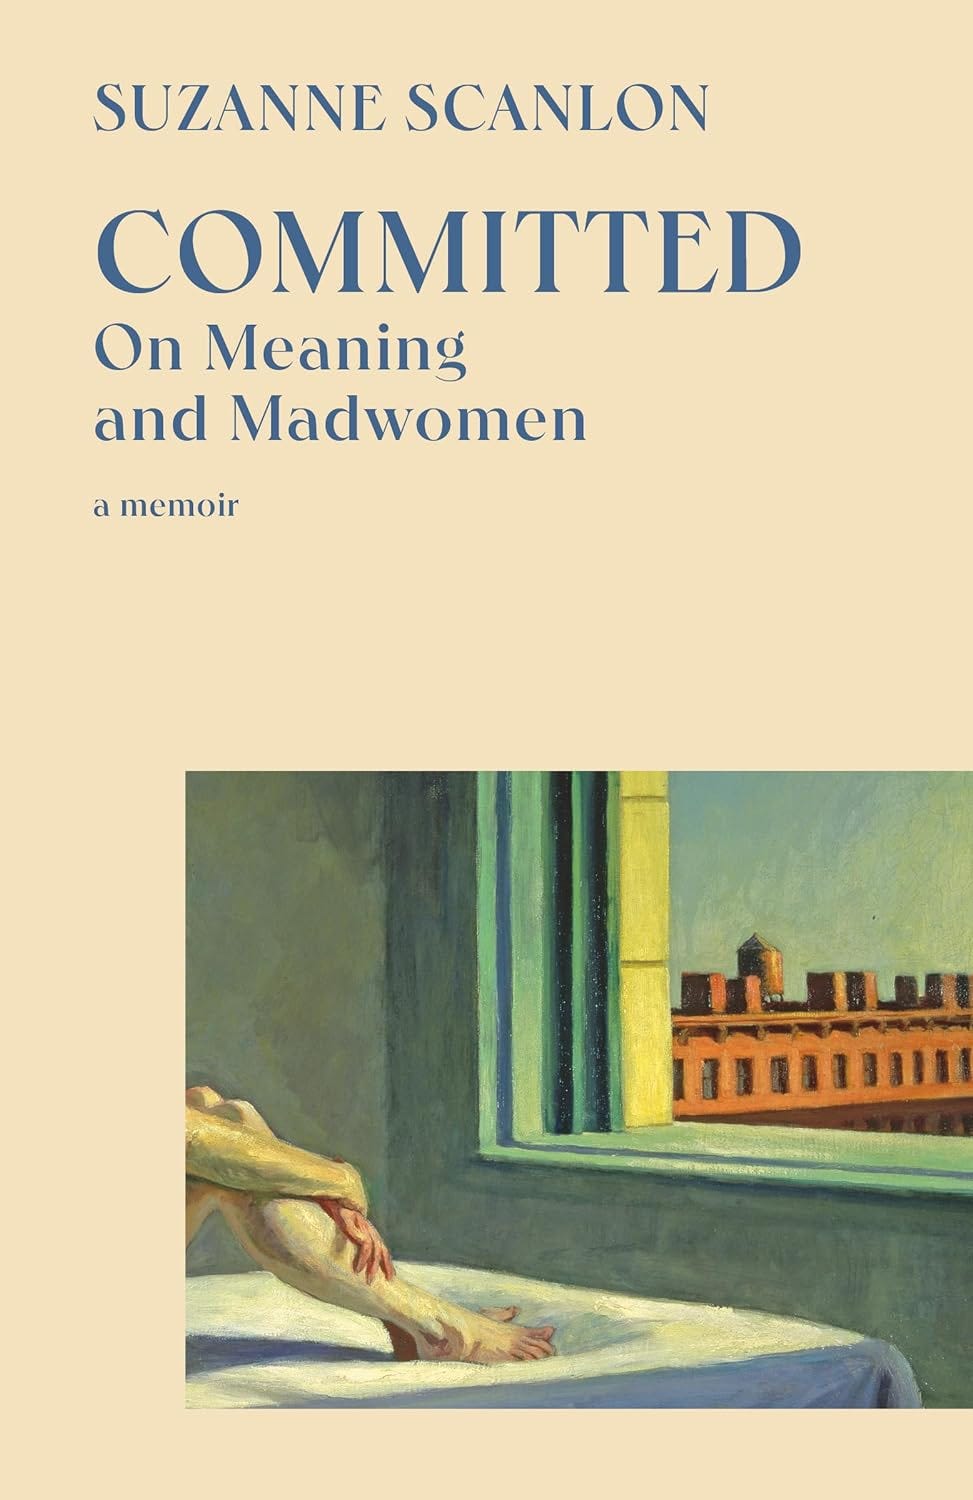 Amazon.com: Committed: On Meaning and Madwomen eBook : Scanlon, Suzanne:  Kindle Store